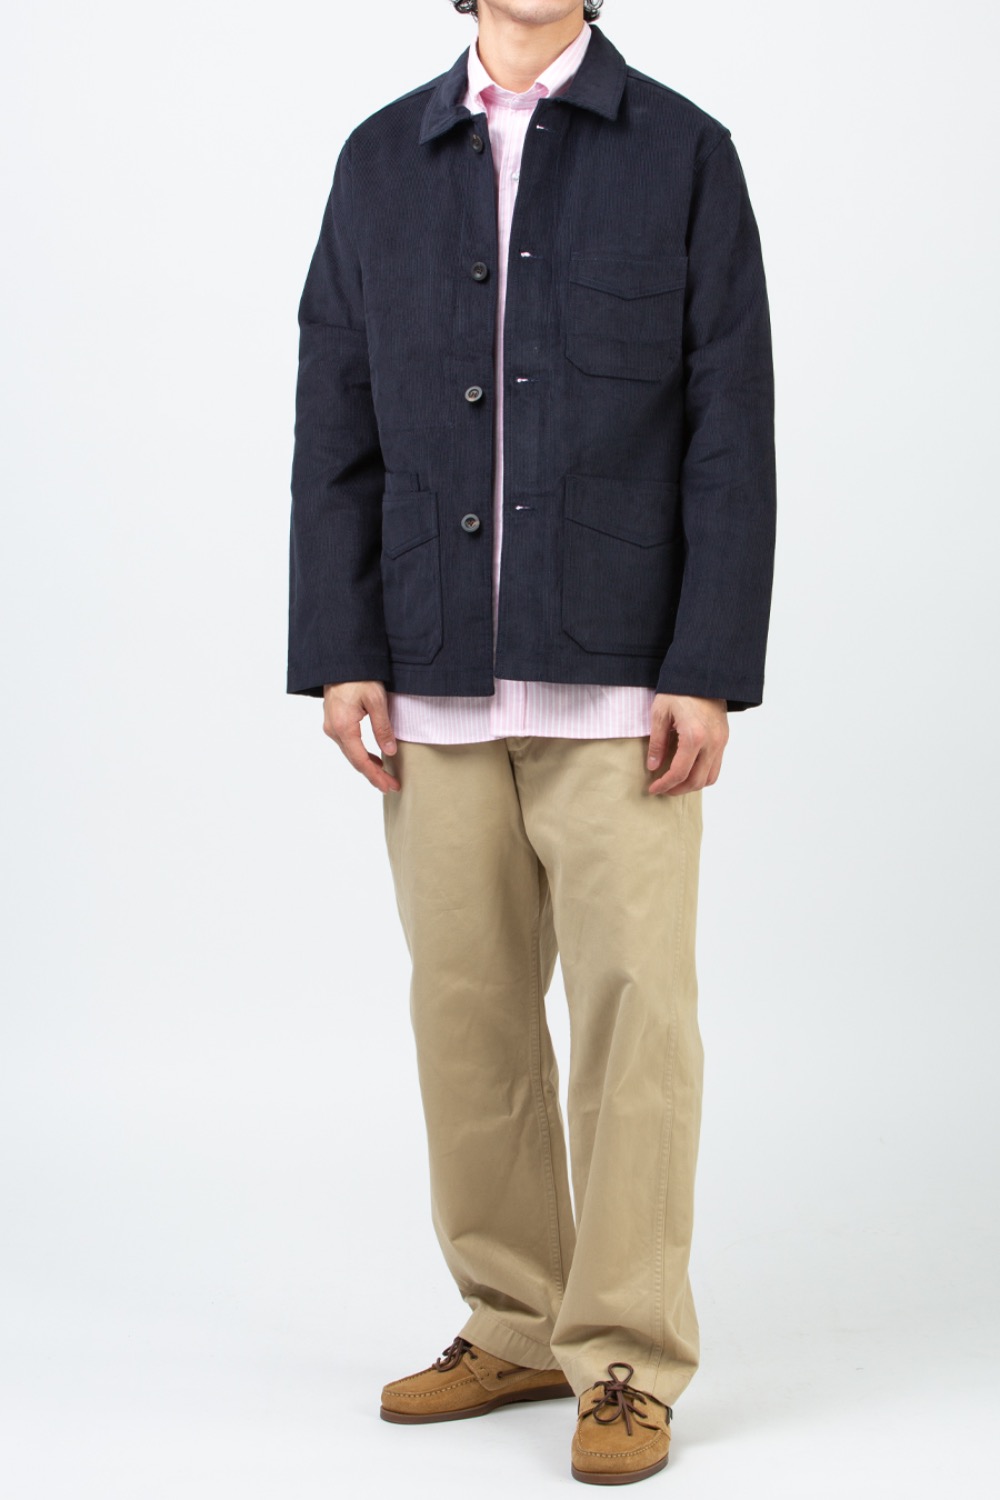 (CARRY OVER) NAVY JAPANESE SELVEDGE CORDUROY FIVE-POCKET CHORE JACKET